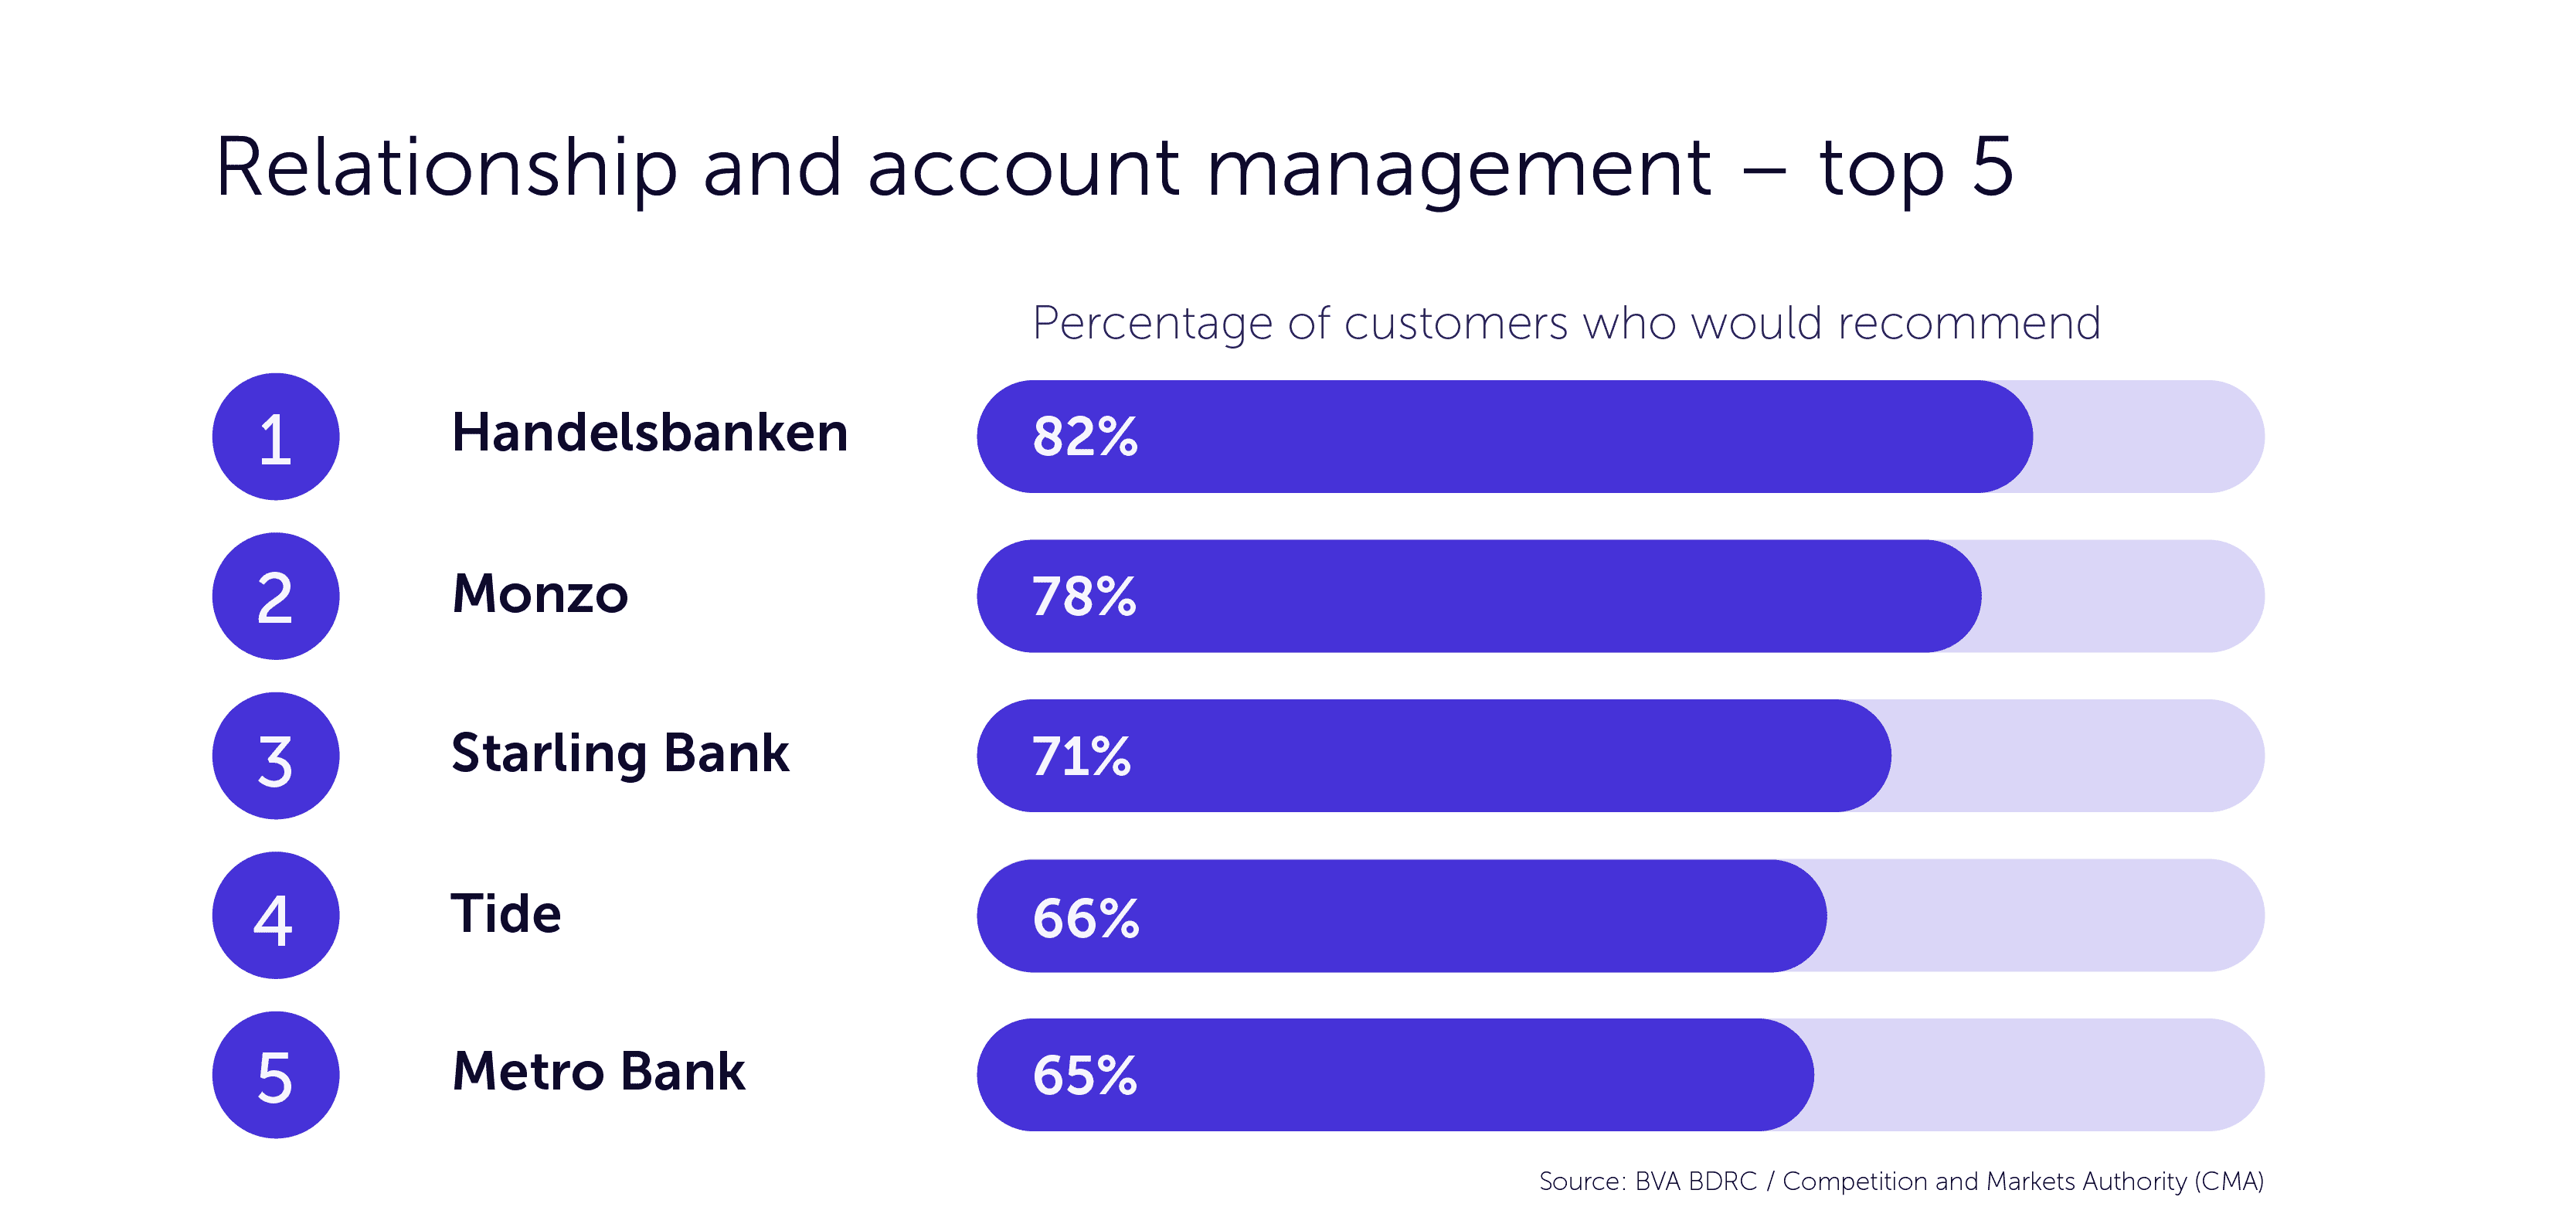 Top 5 business banks for relationship and account management